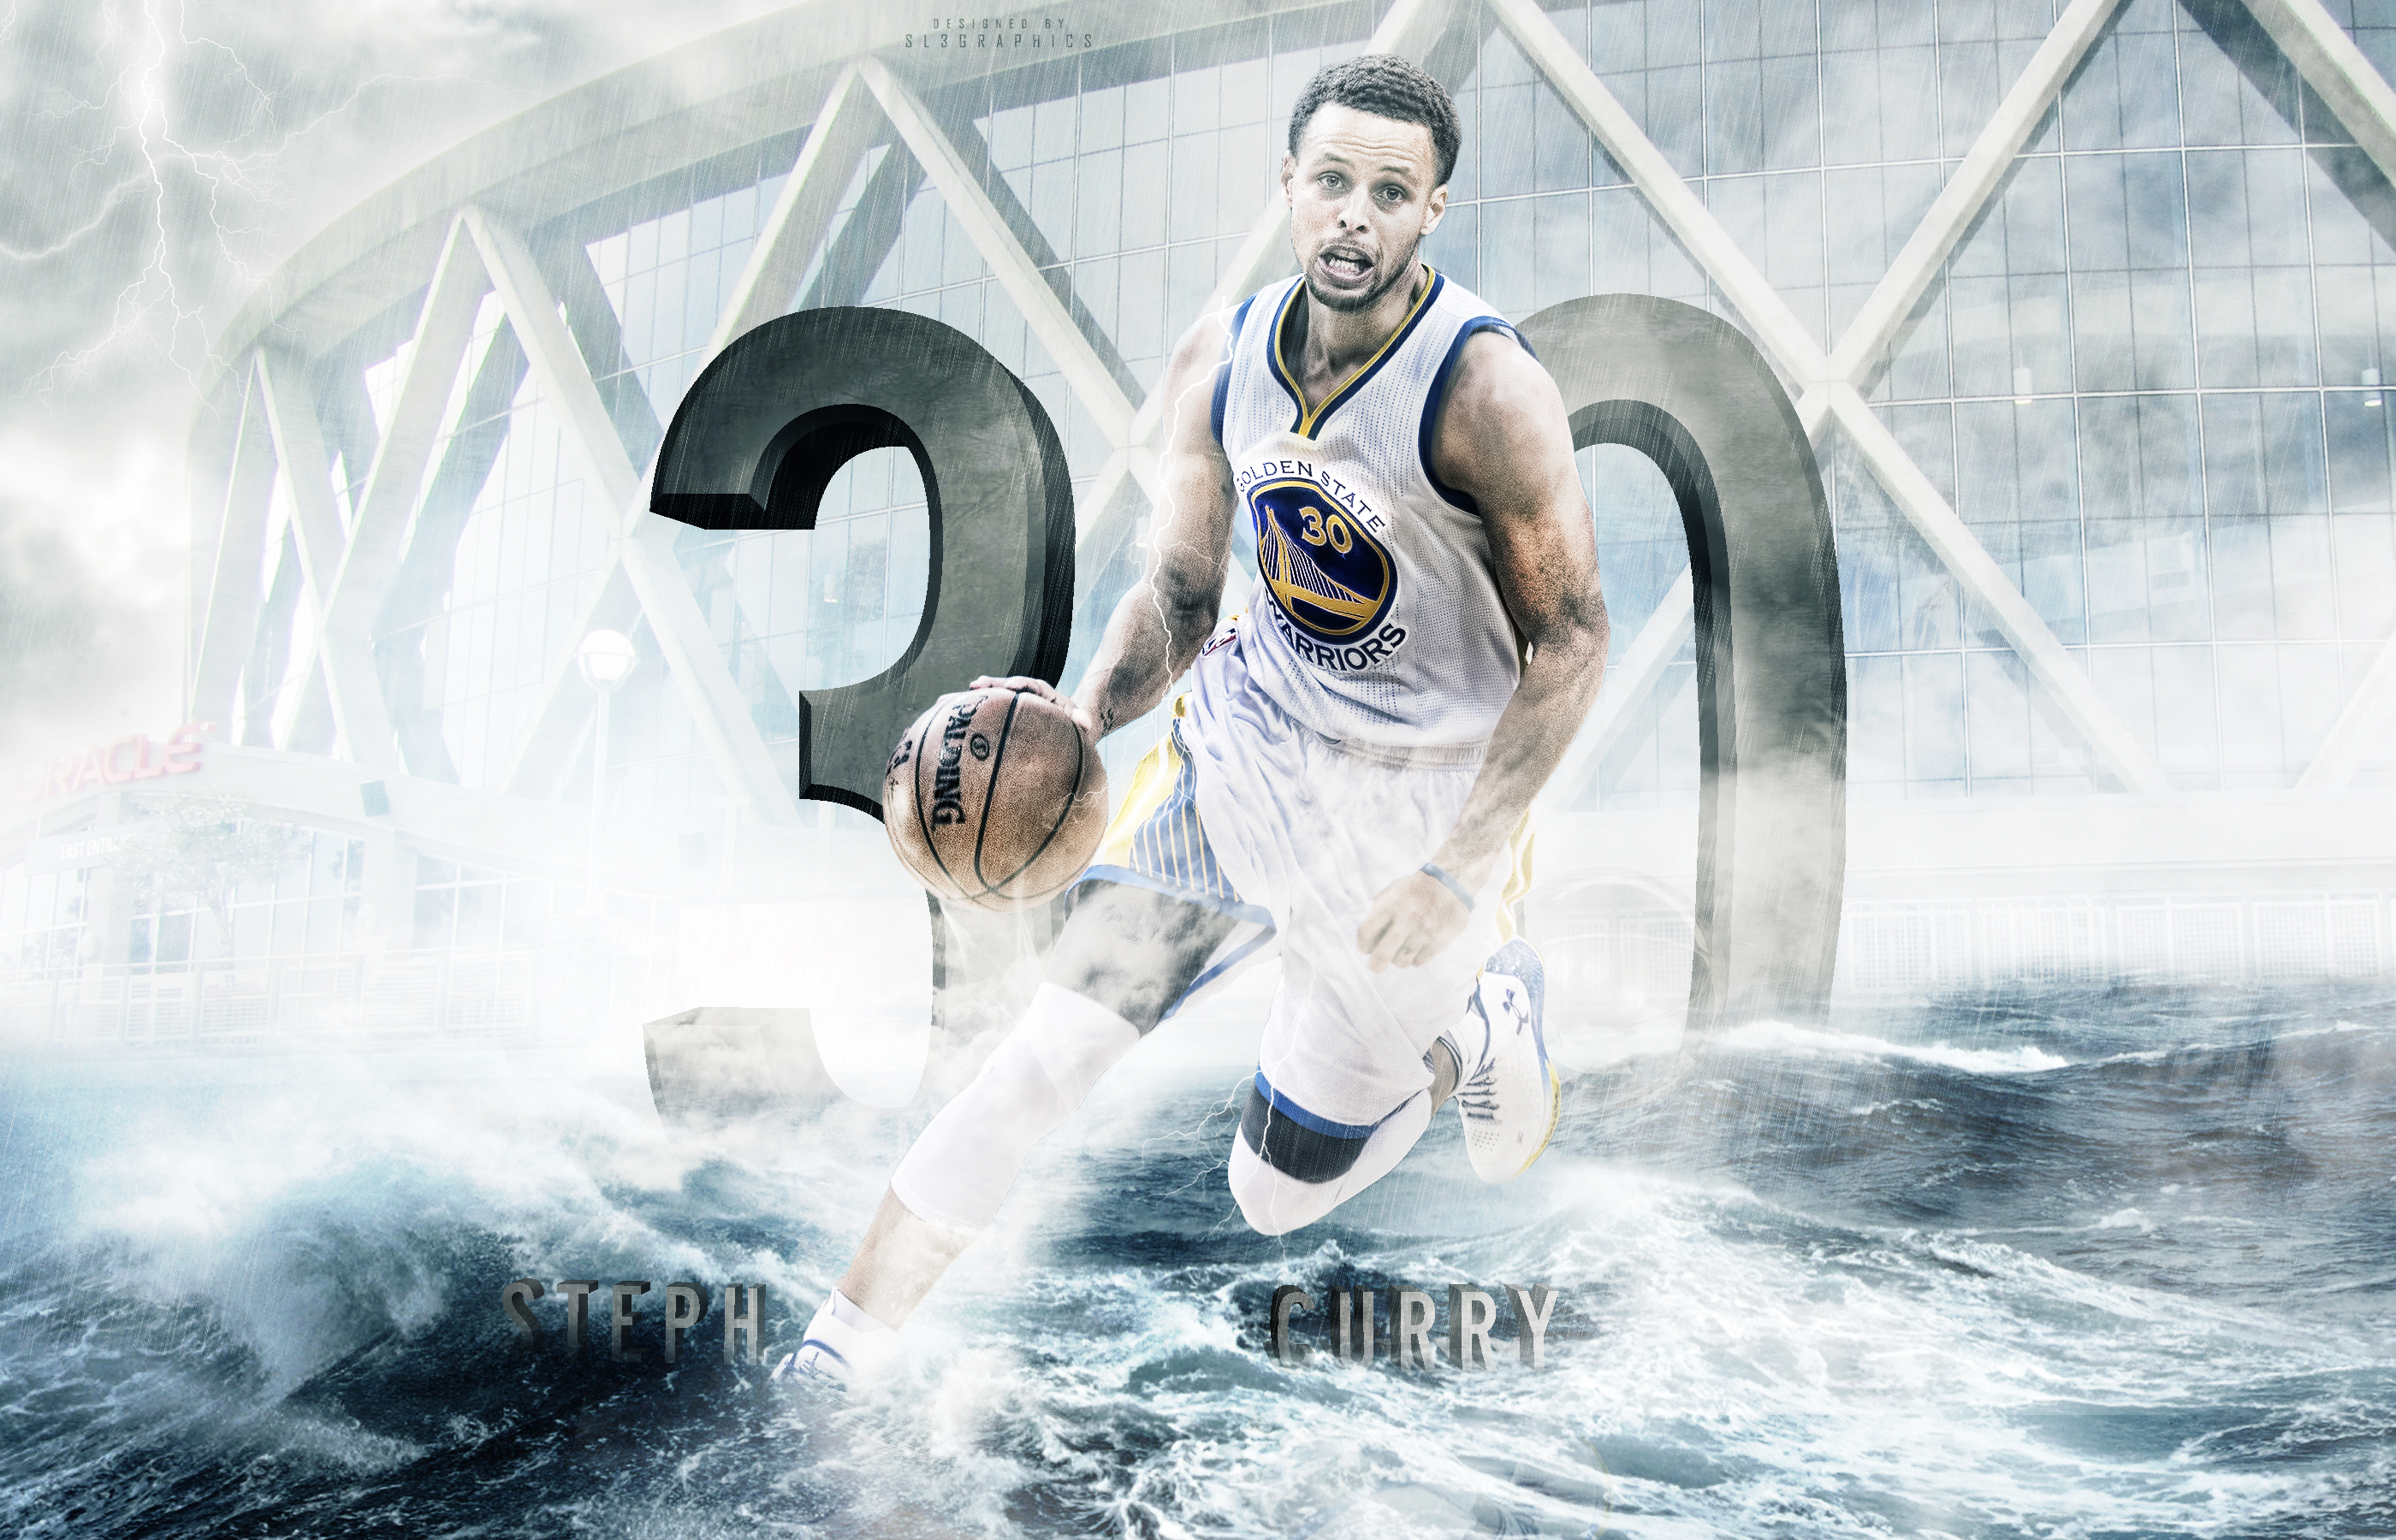 Stephen Curry Android Hd Backgrounds Page 3 Of 3 Wallpaper - Cool Wallpapers Of Stephen Curry - HD Wallpaper 